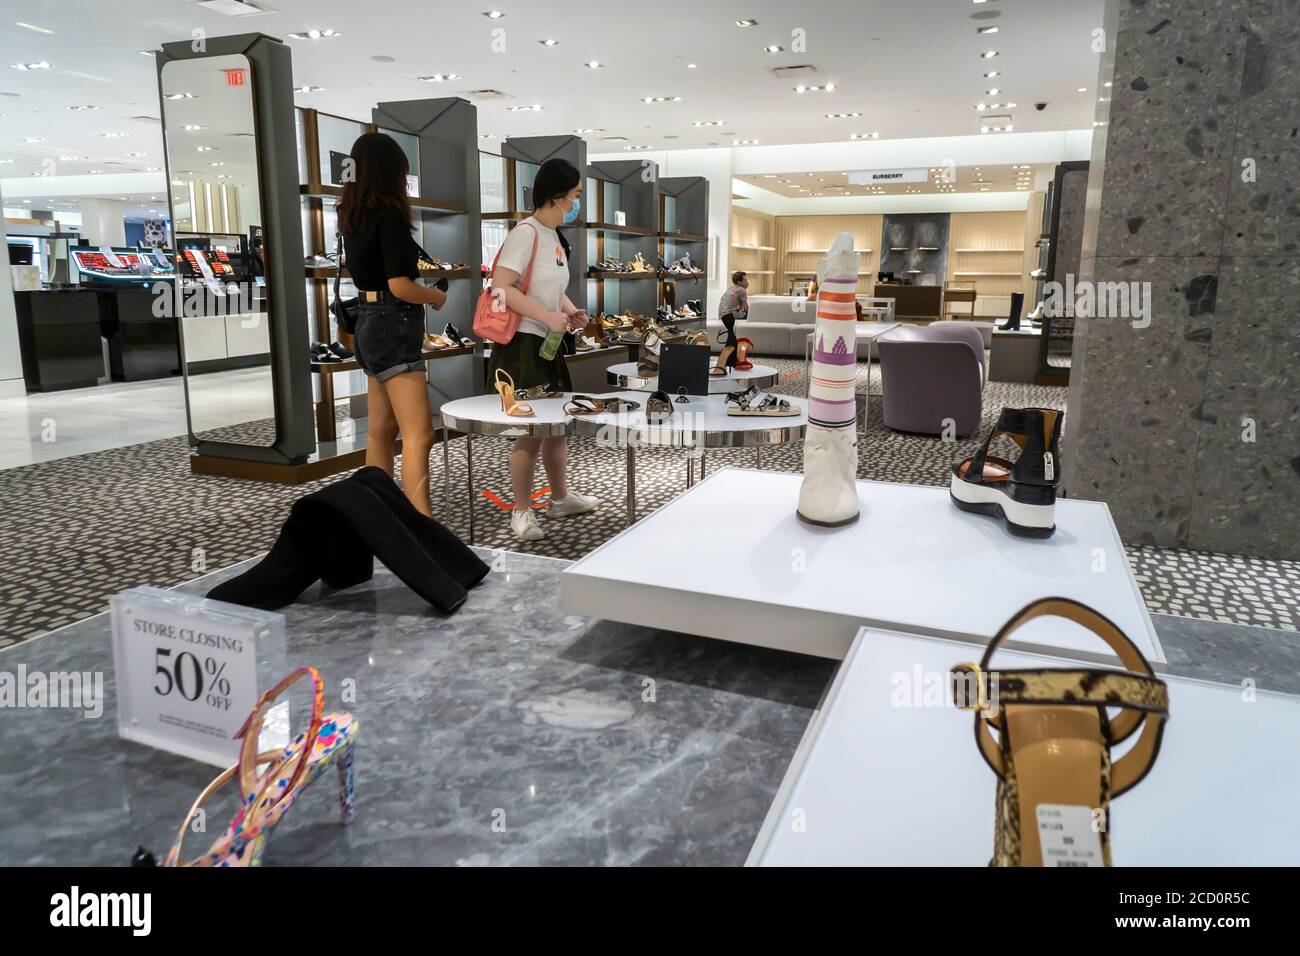 Louis Vuitton boutique in the closing Neiman Marcus store in Hudson Yards  in New York on Friday, August 21, 2020. In bankruptcy, Neiman Marcus is  vacating their location in Hudson Yards where